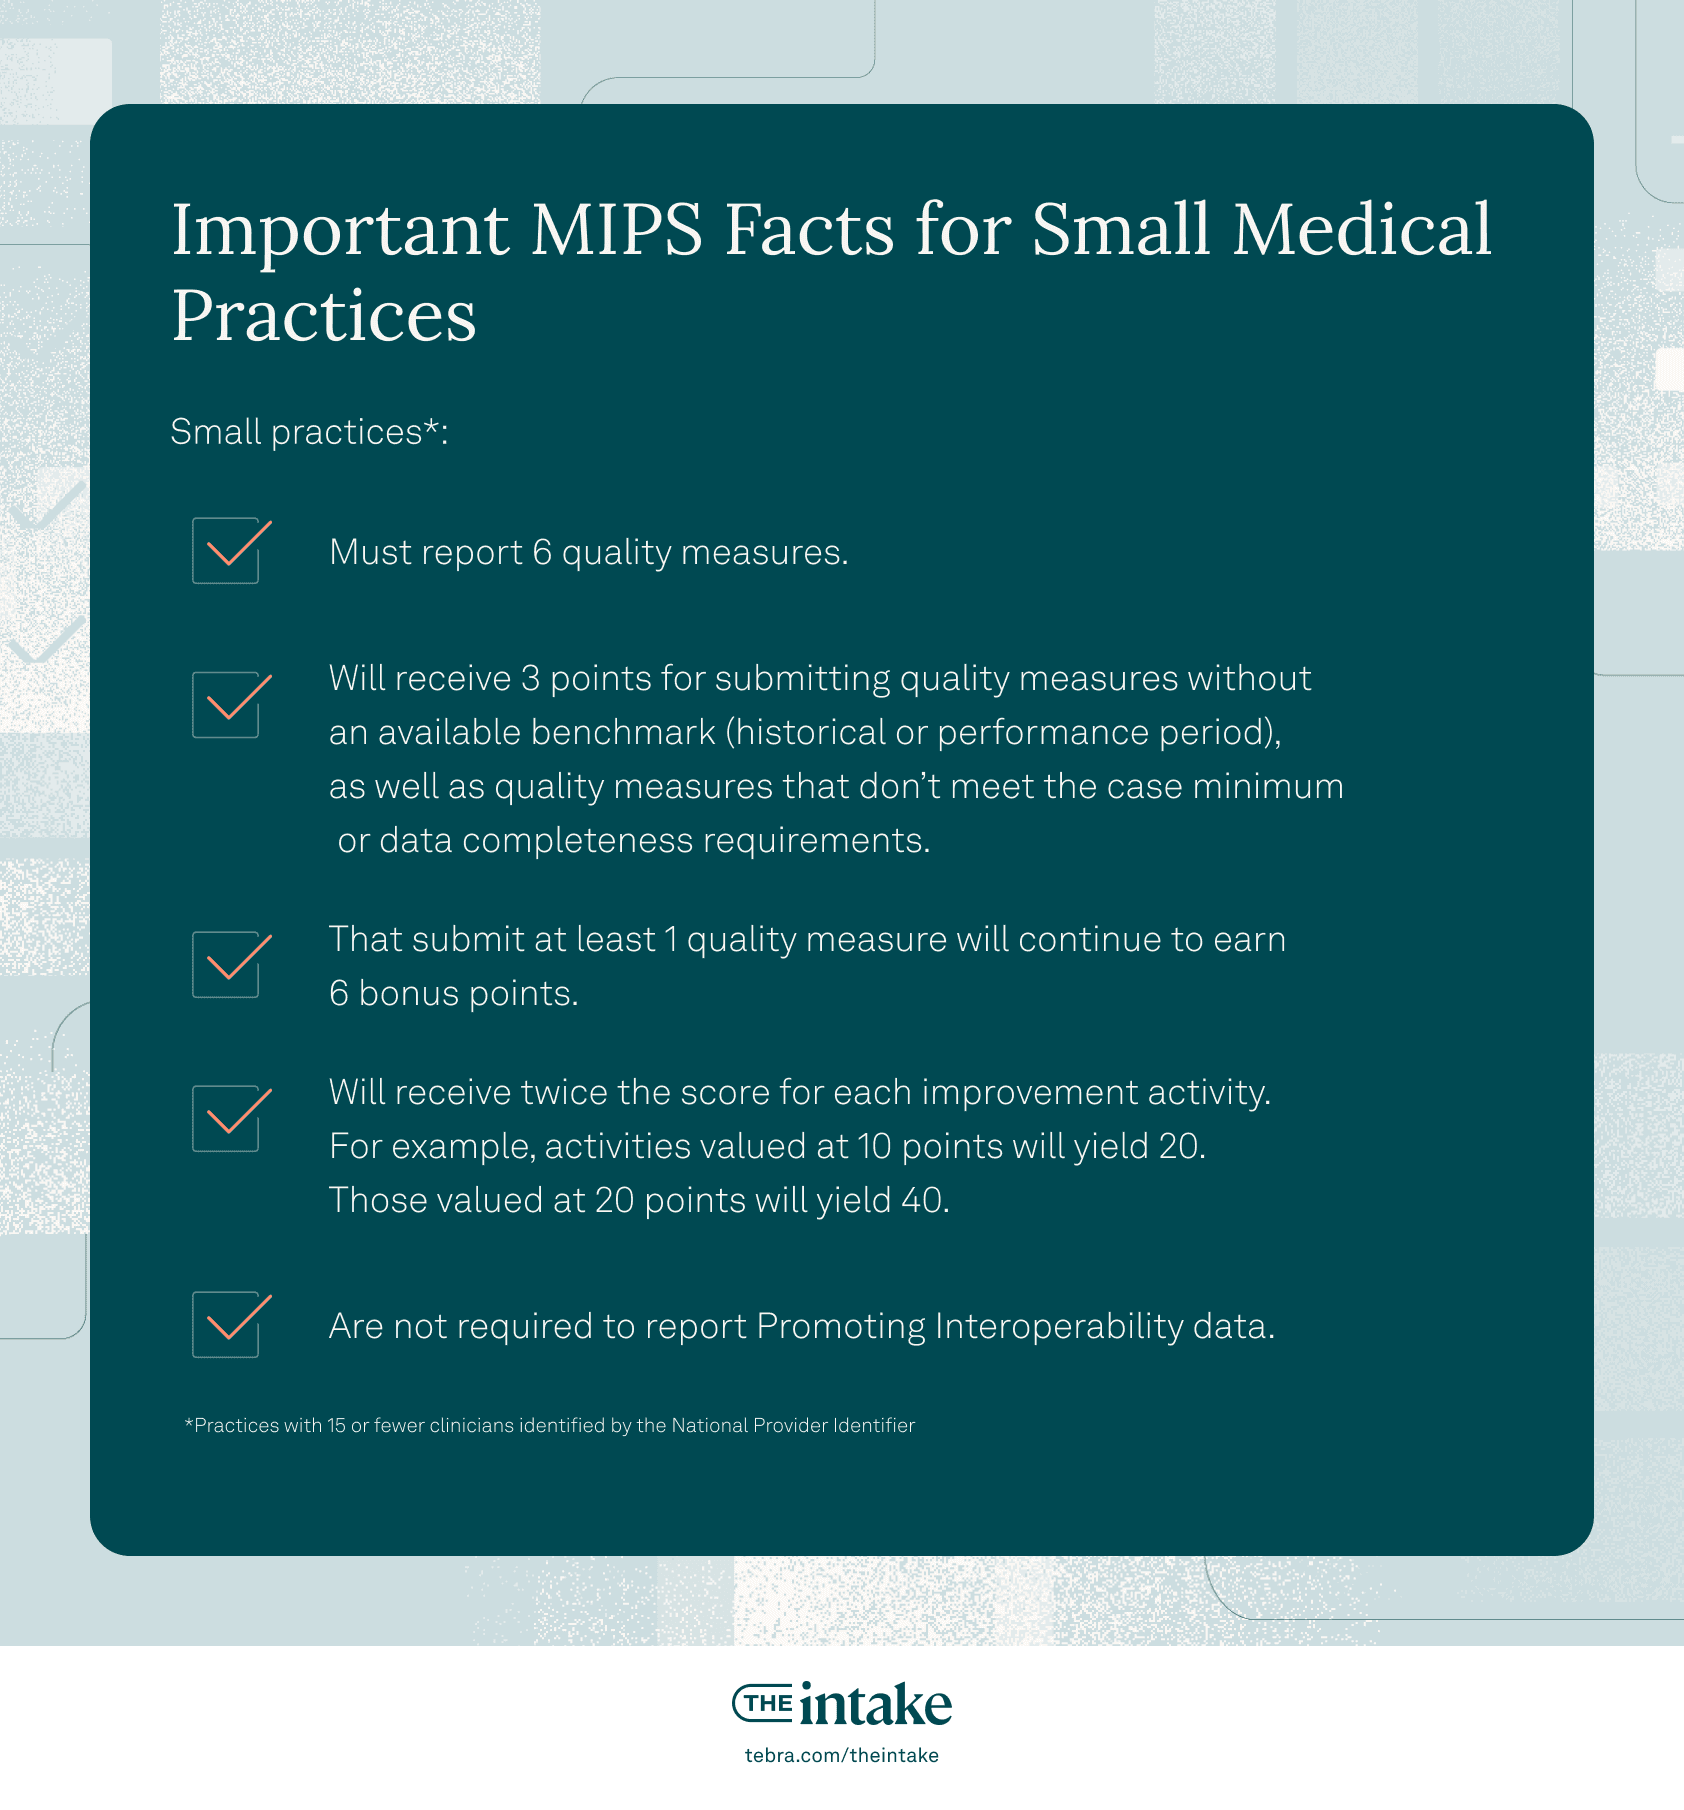 MIPS facts for small practices